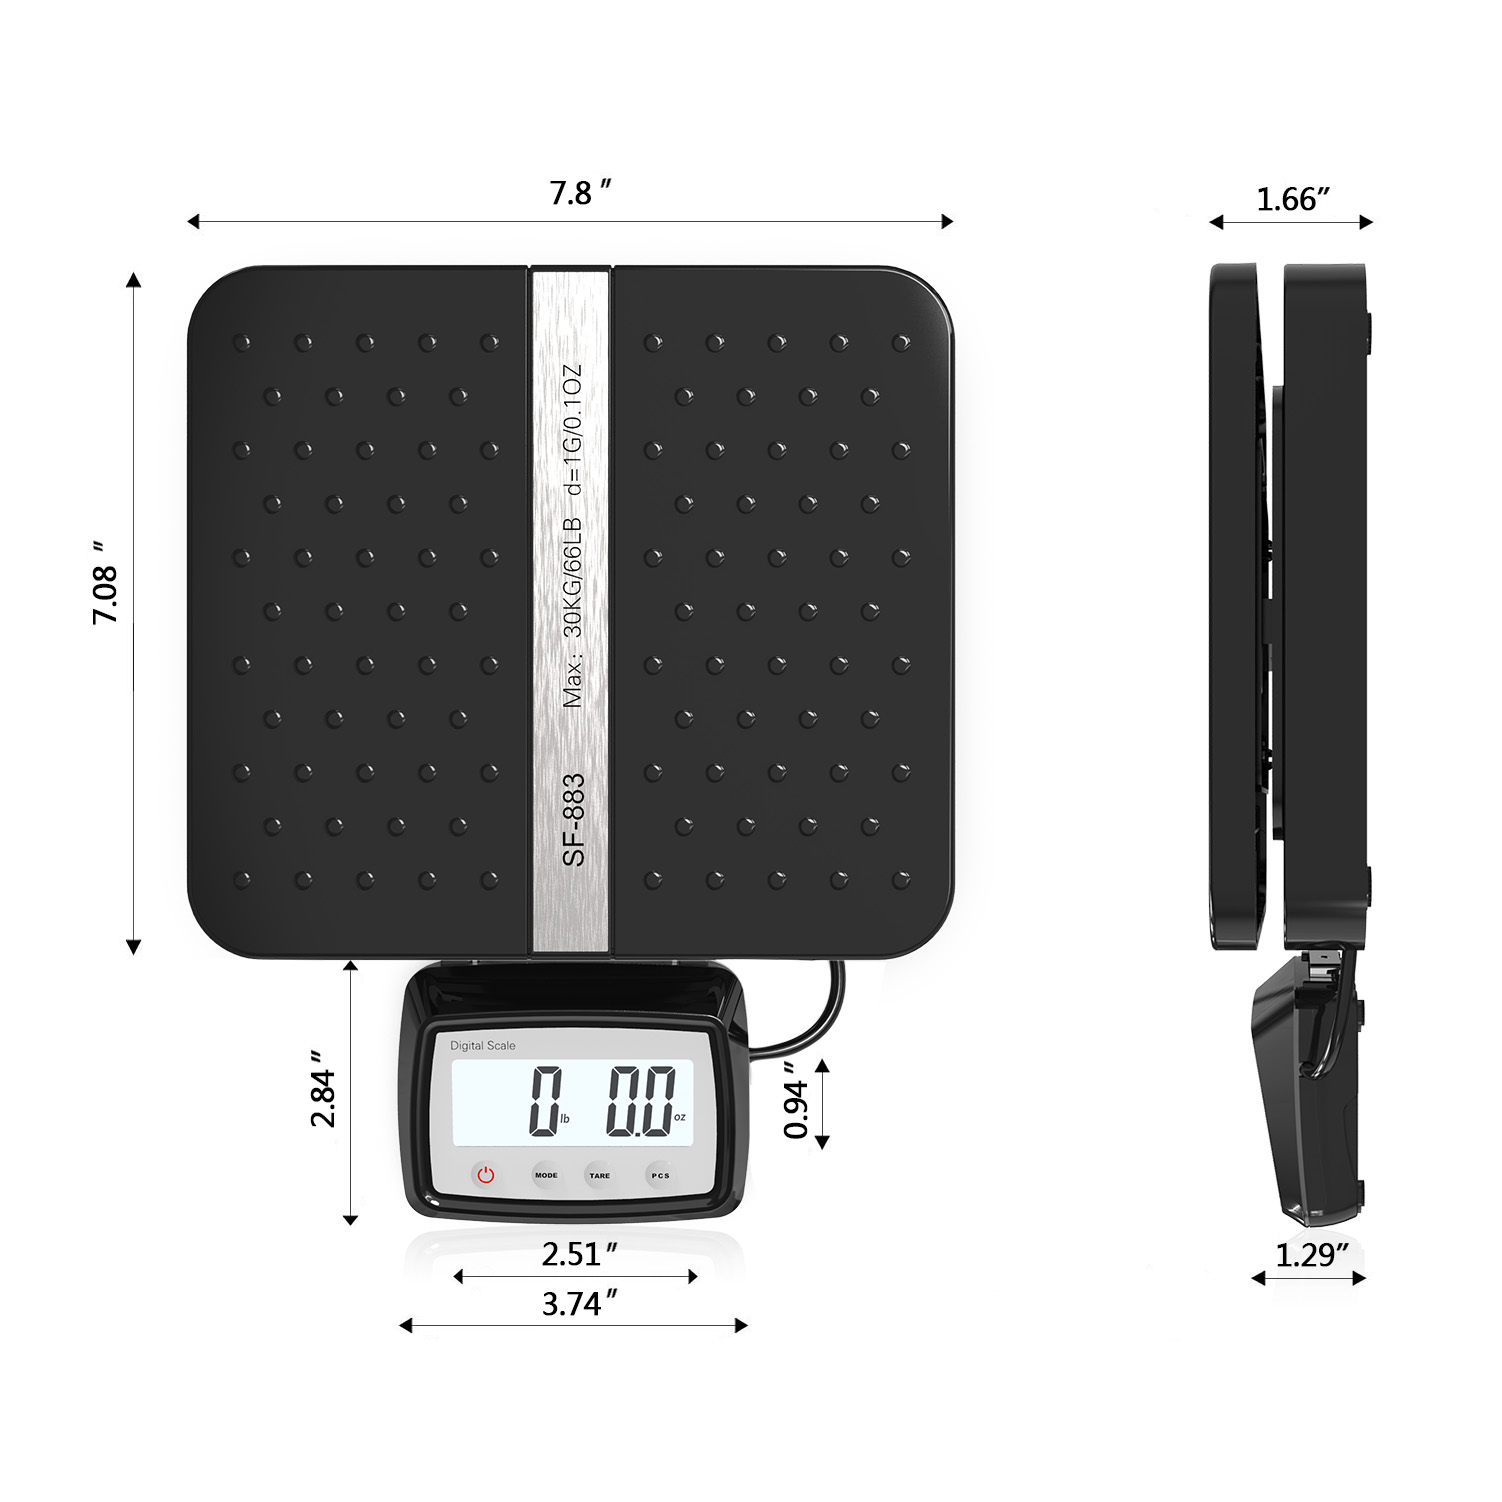 SF-883 2020 Latest ABS Platform Digital Weight Machine Electronic Weighing Postal Scales